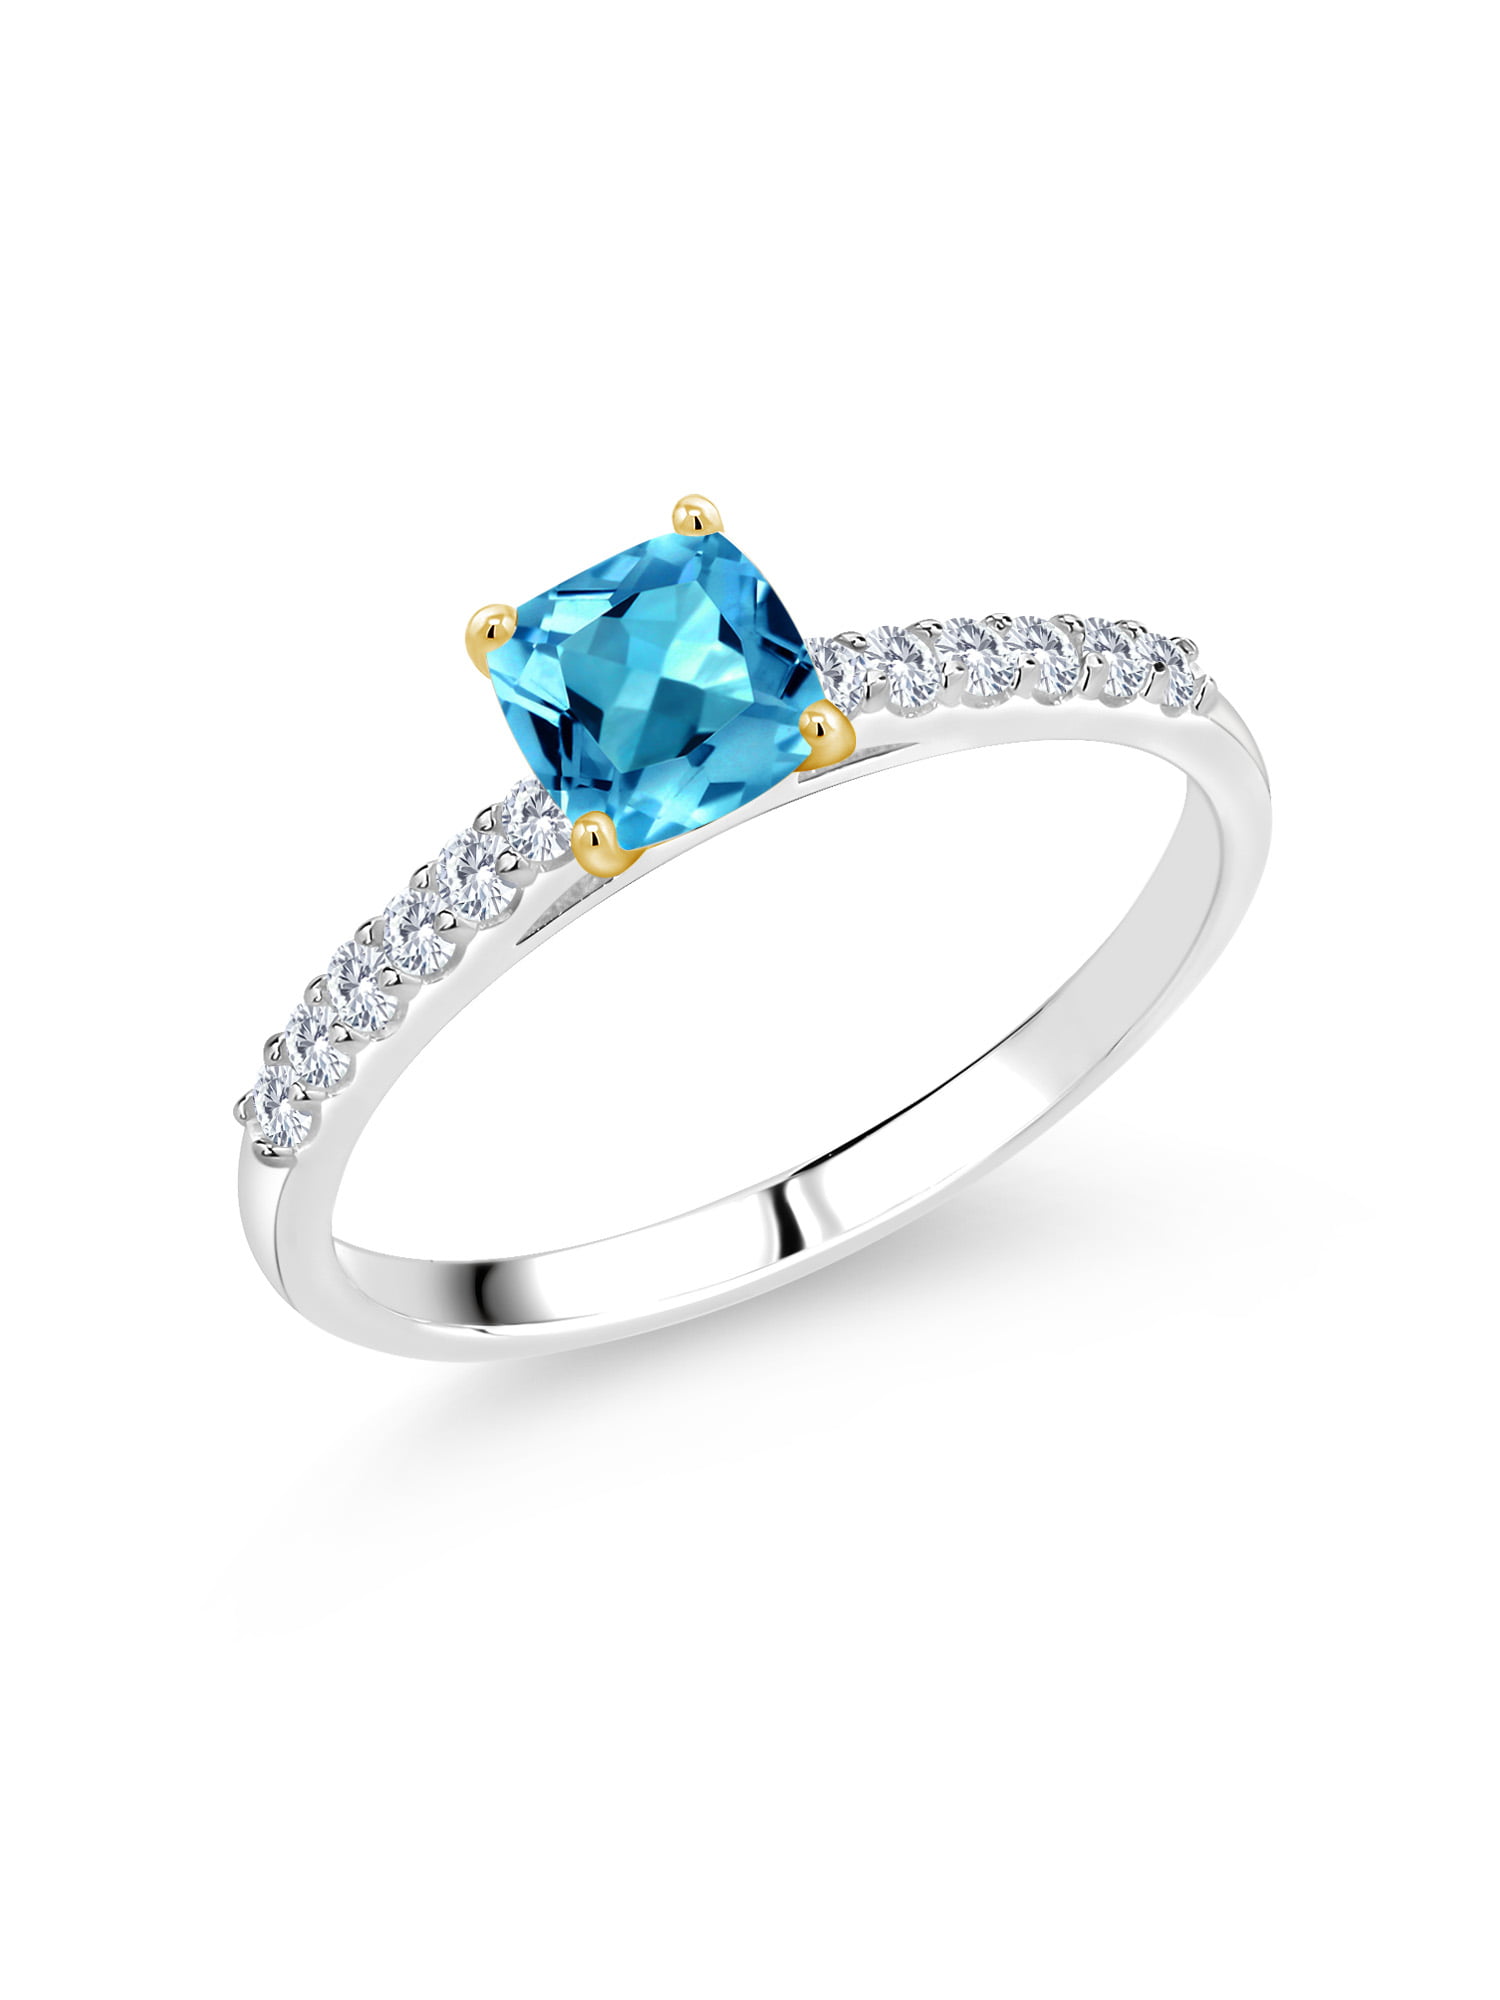 Gem Stone King 0.83 Ct Sky Blue Topaz White Diamond 925 Yellow Gold Plated Silver 3-Stone Ring